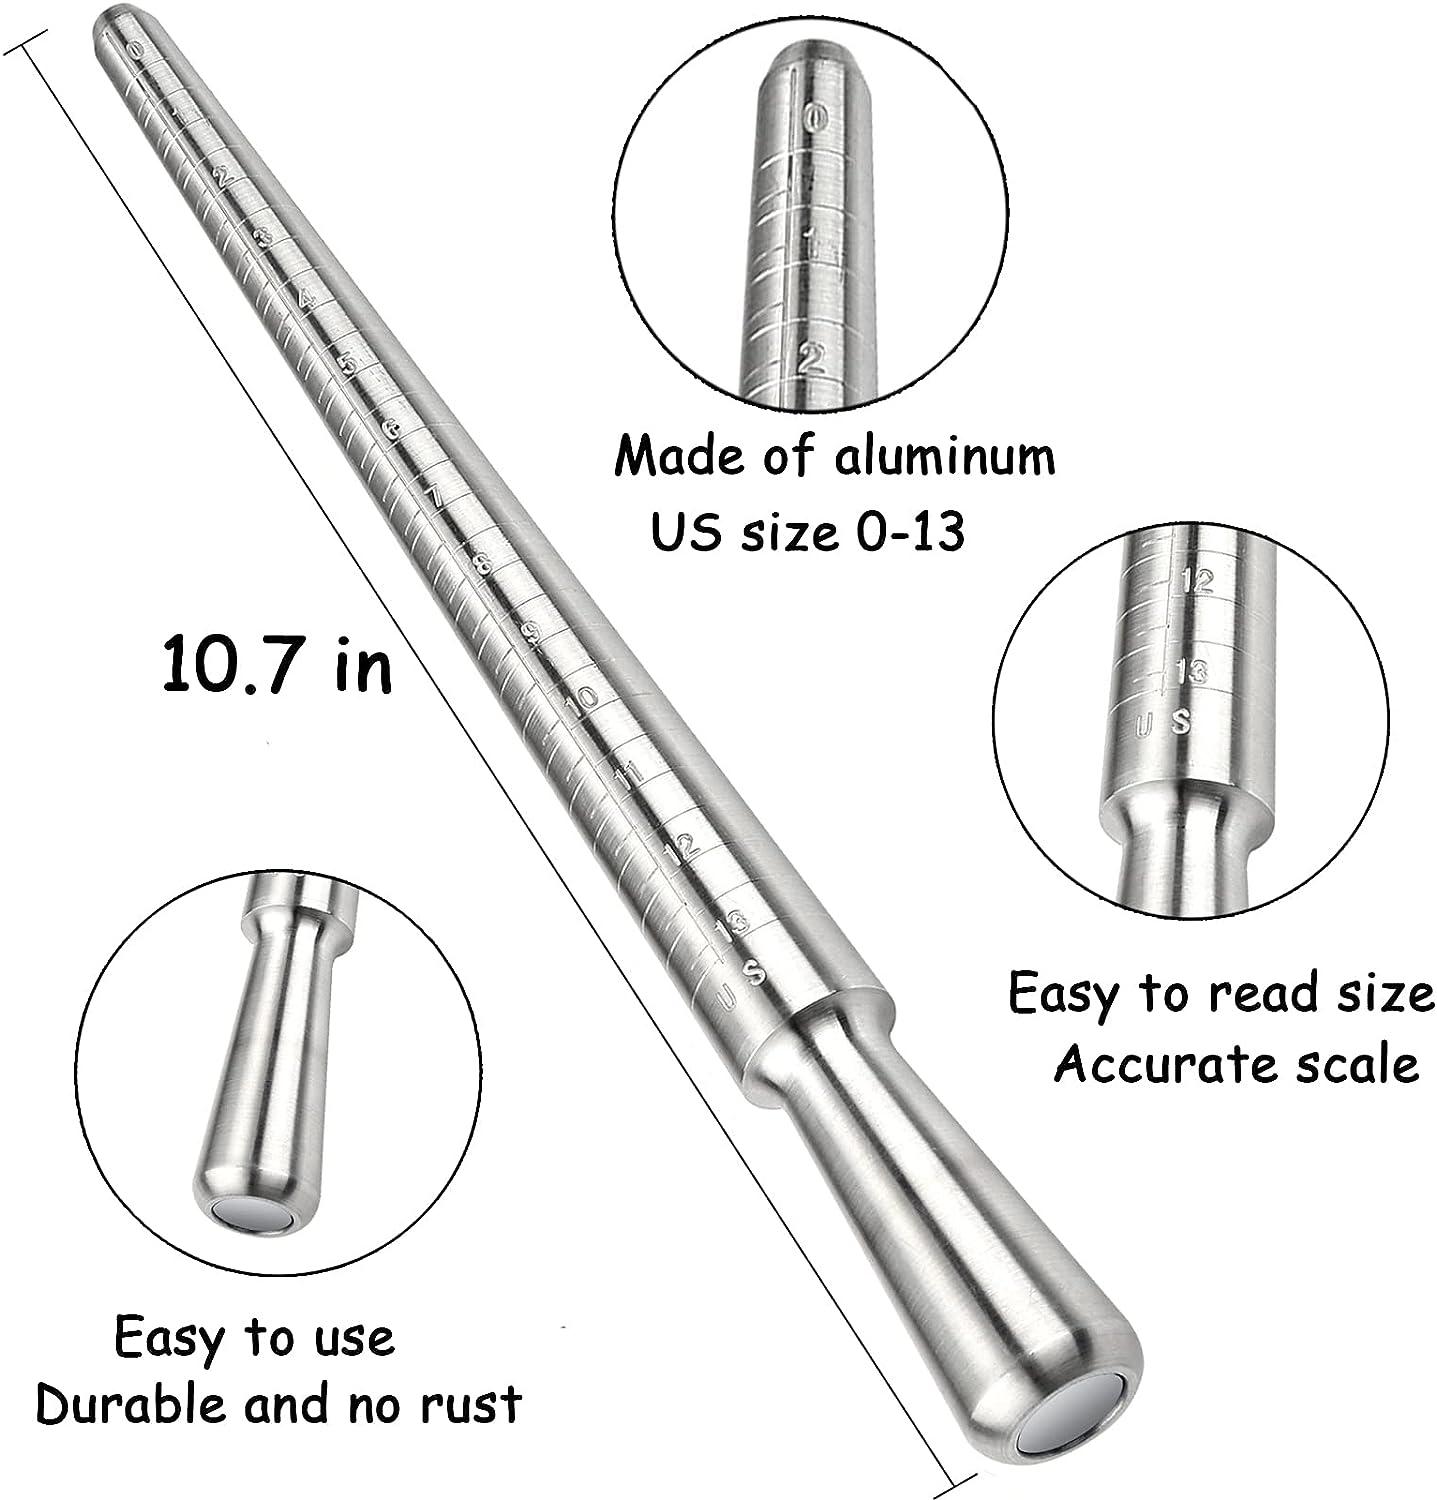 Accmor Ring Sizer Measurement Tool Including Metal Ring Mandrel & Ring  Sizing Guage - US Size 0-13, Ring Measurering Stick & Finger Size Ket Set  for Jewelry Making